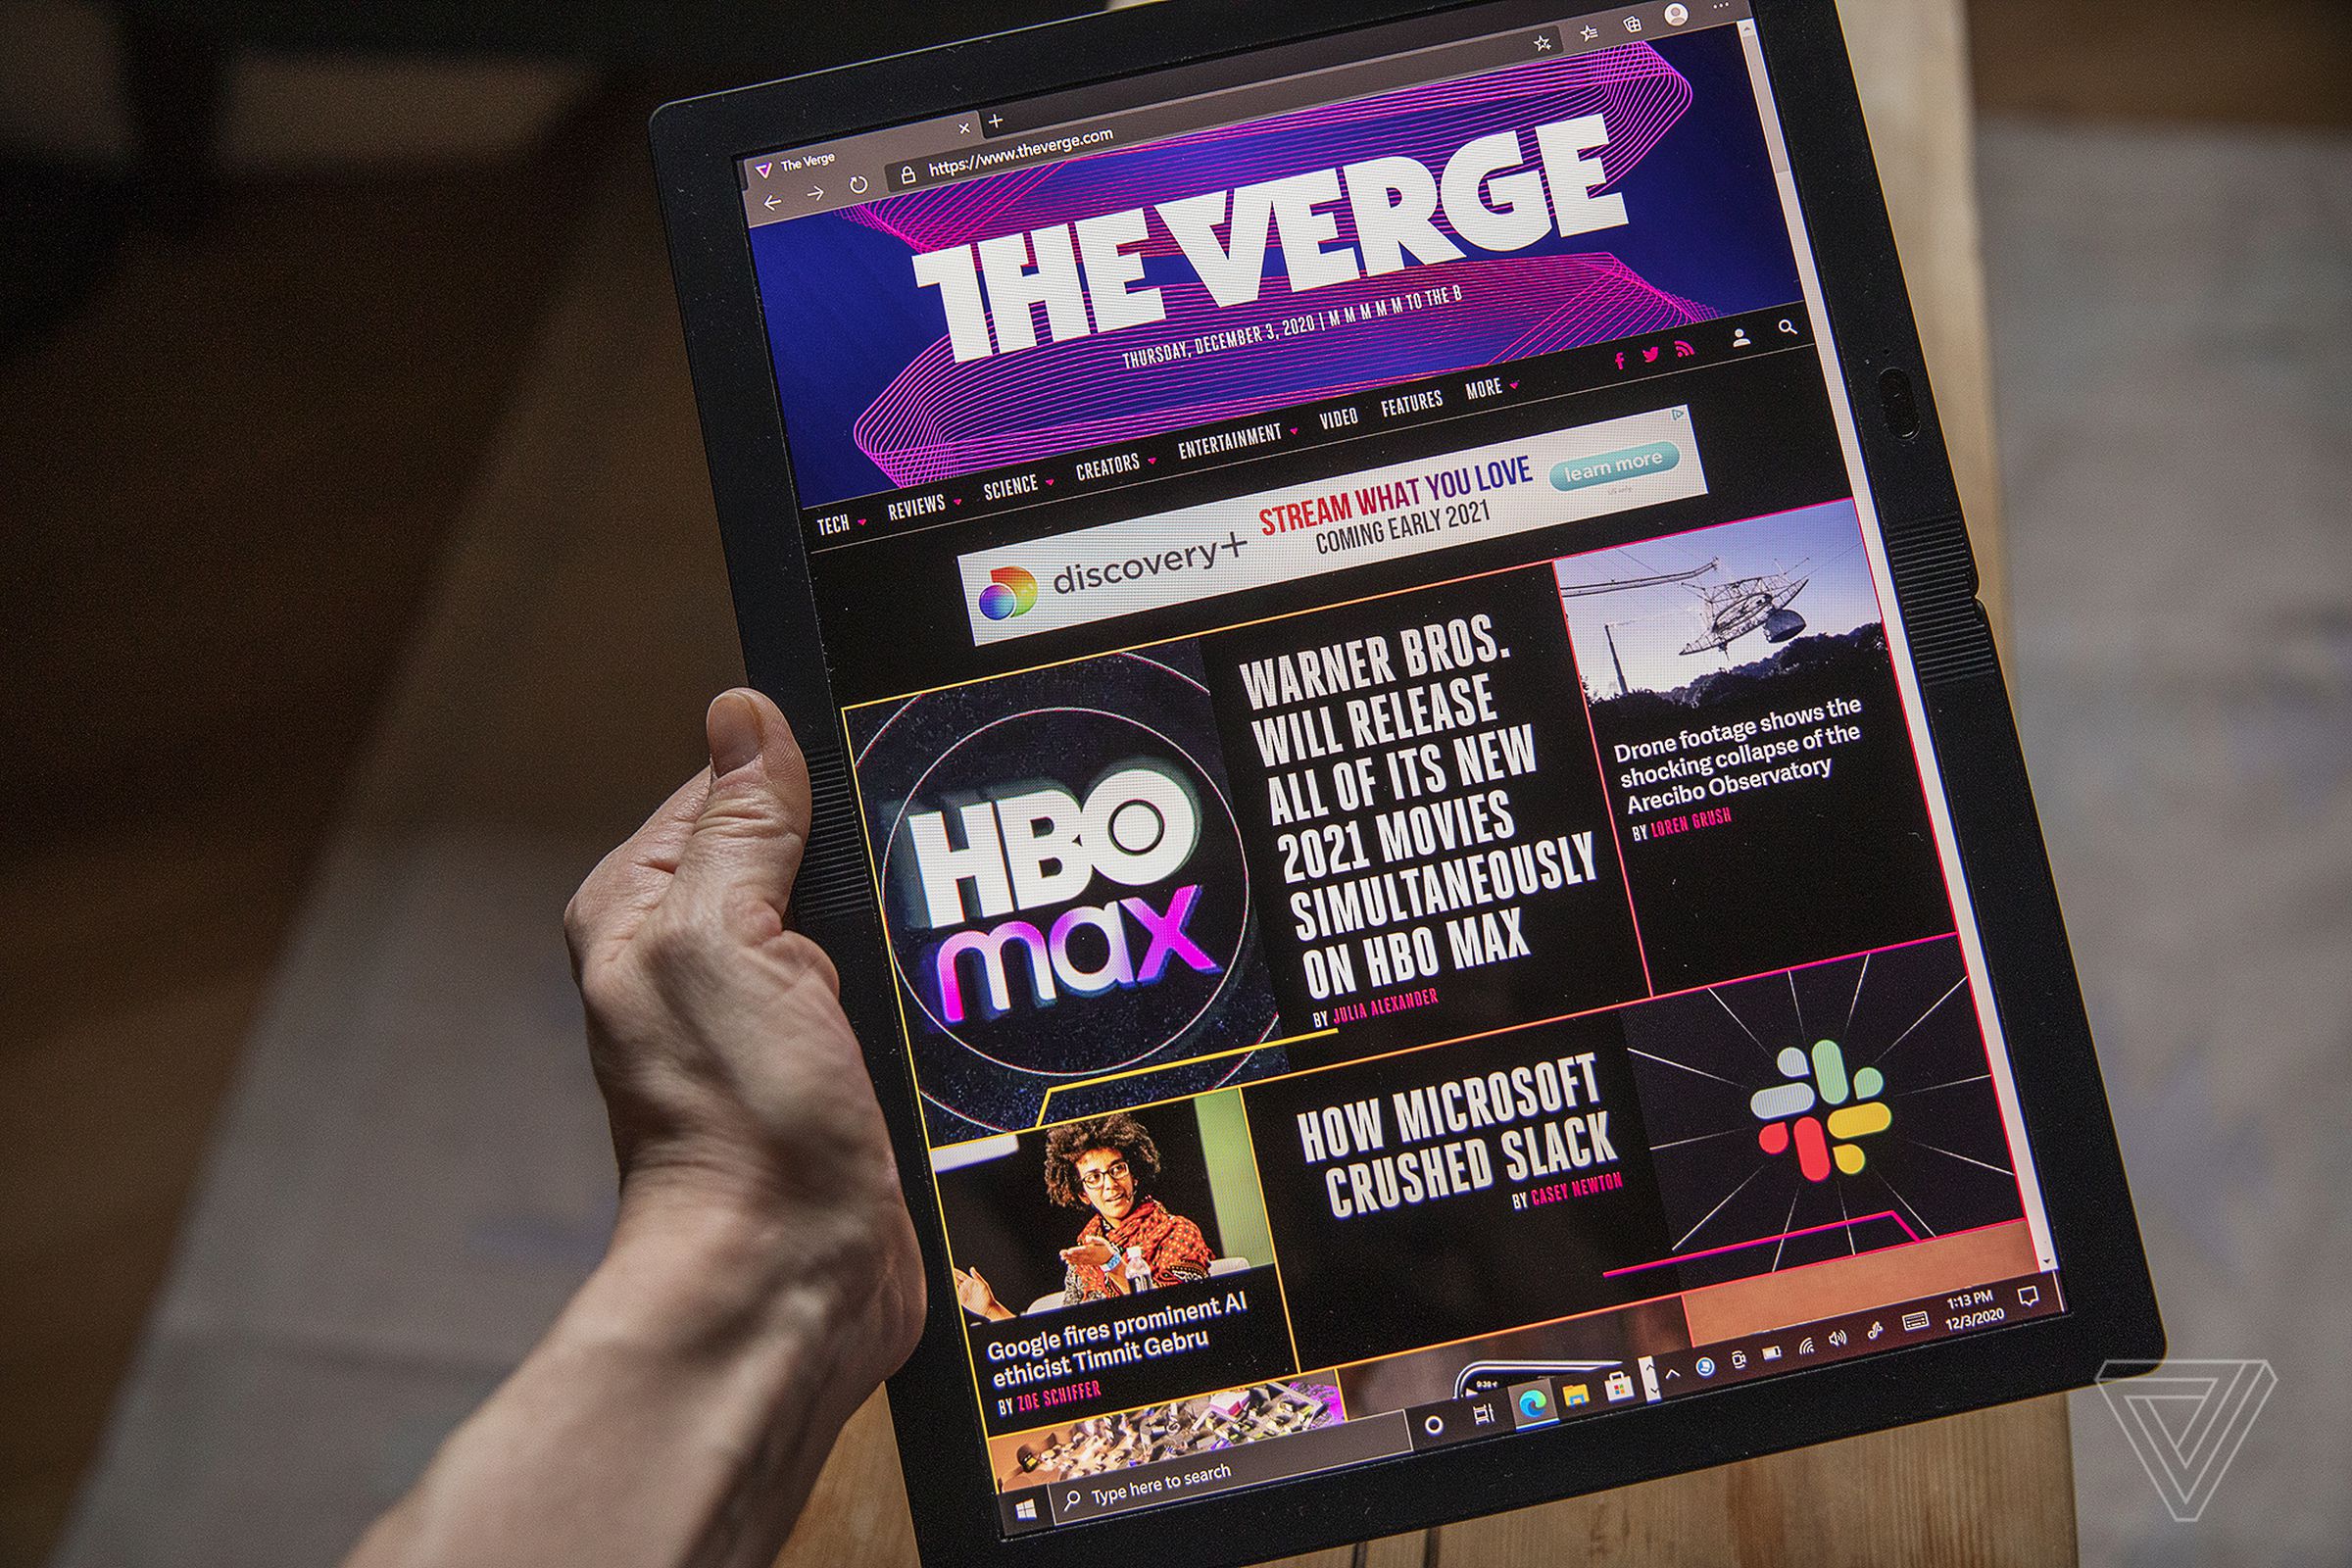 The Lenovo ThinkPad X1 Fold in tablet mode, displaying The Verge’s homepage.